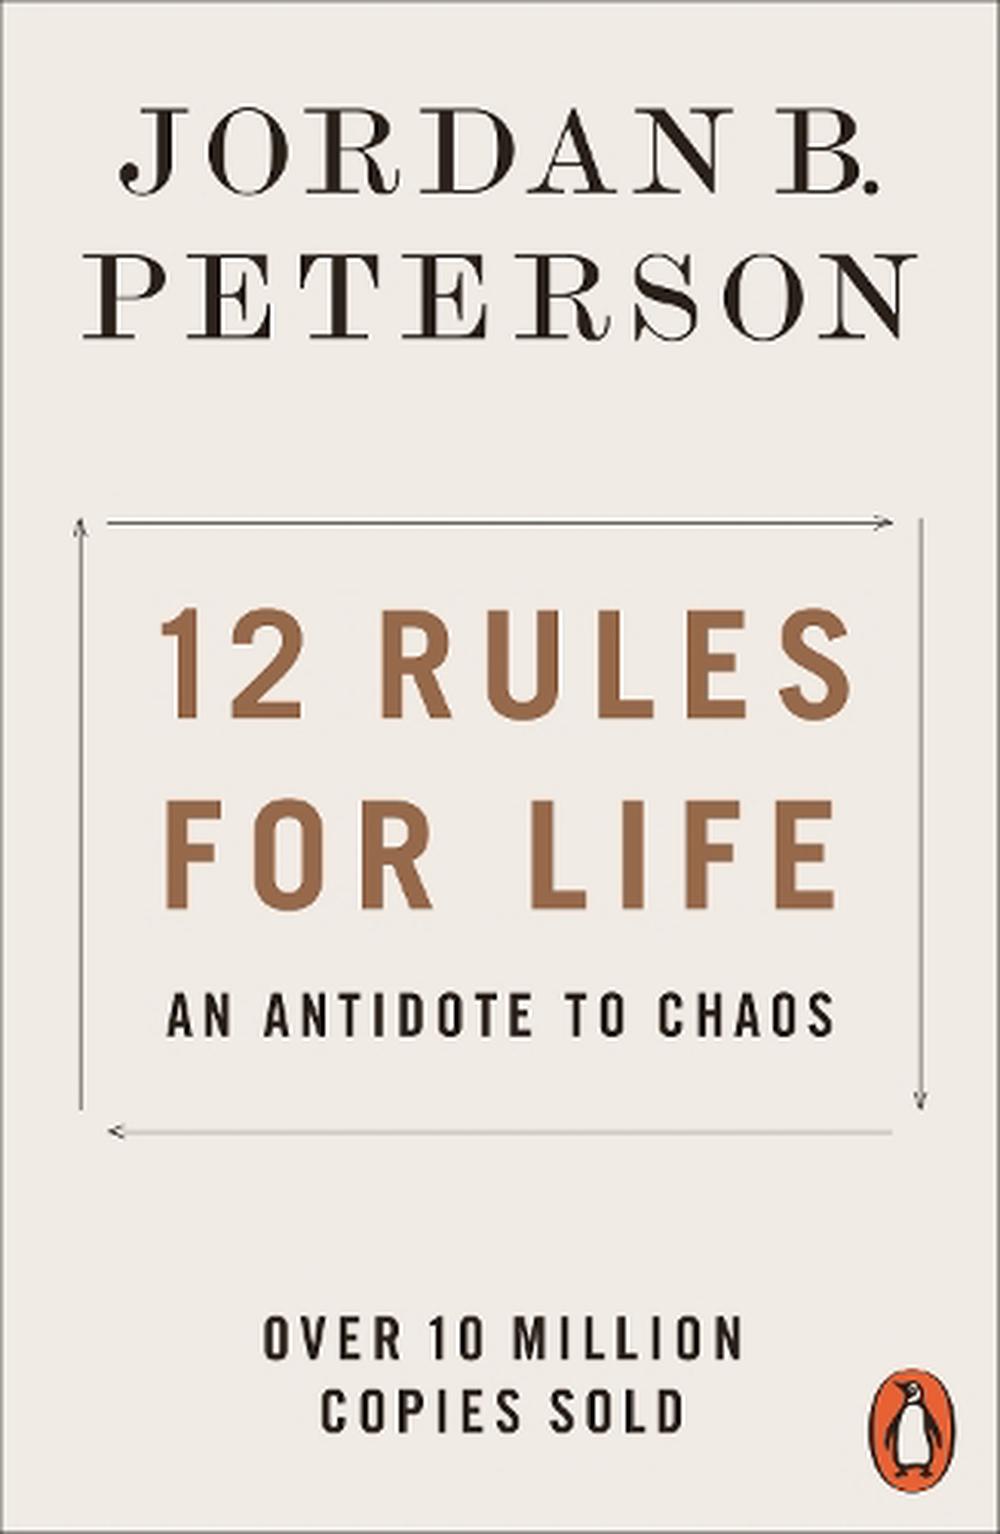 12 rules for life summary jordan peterson